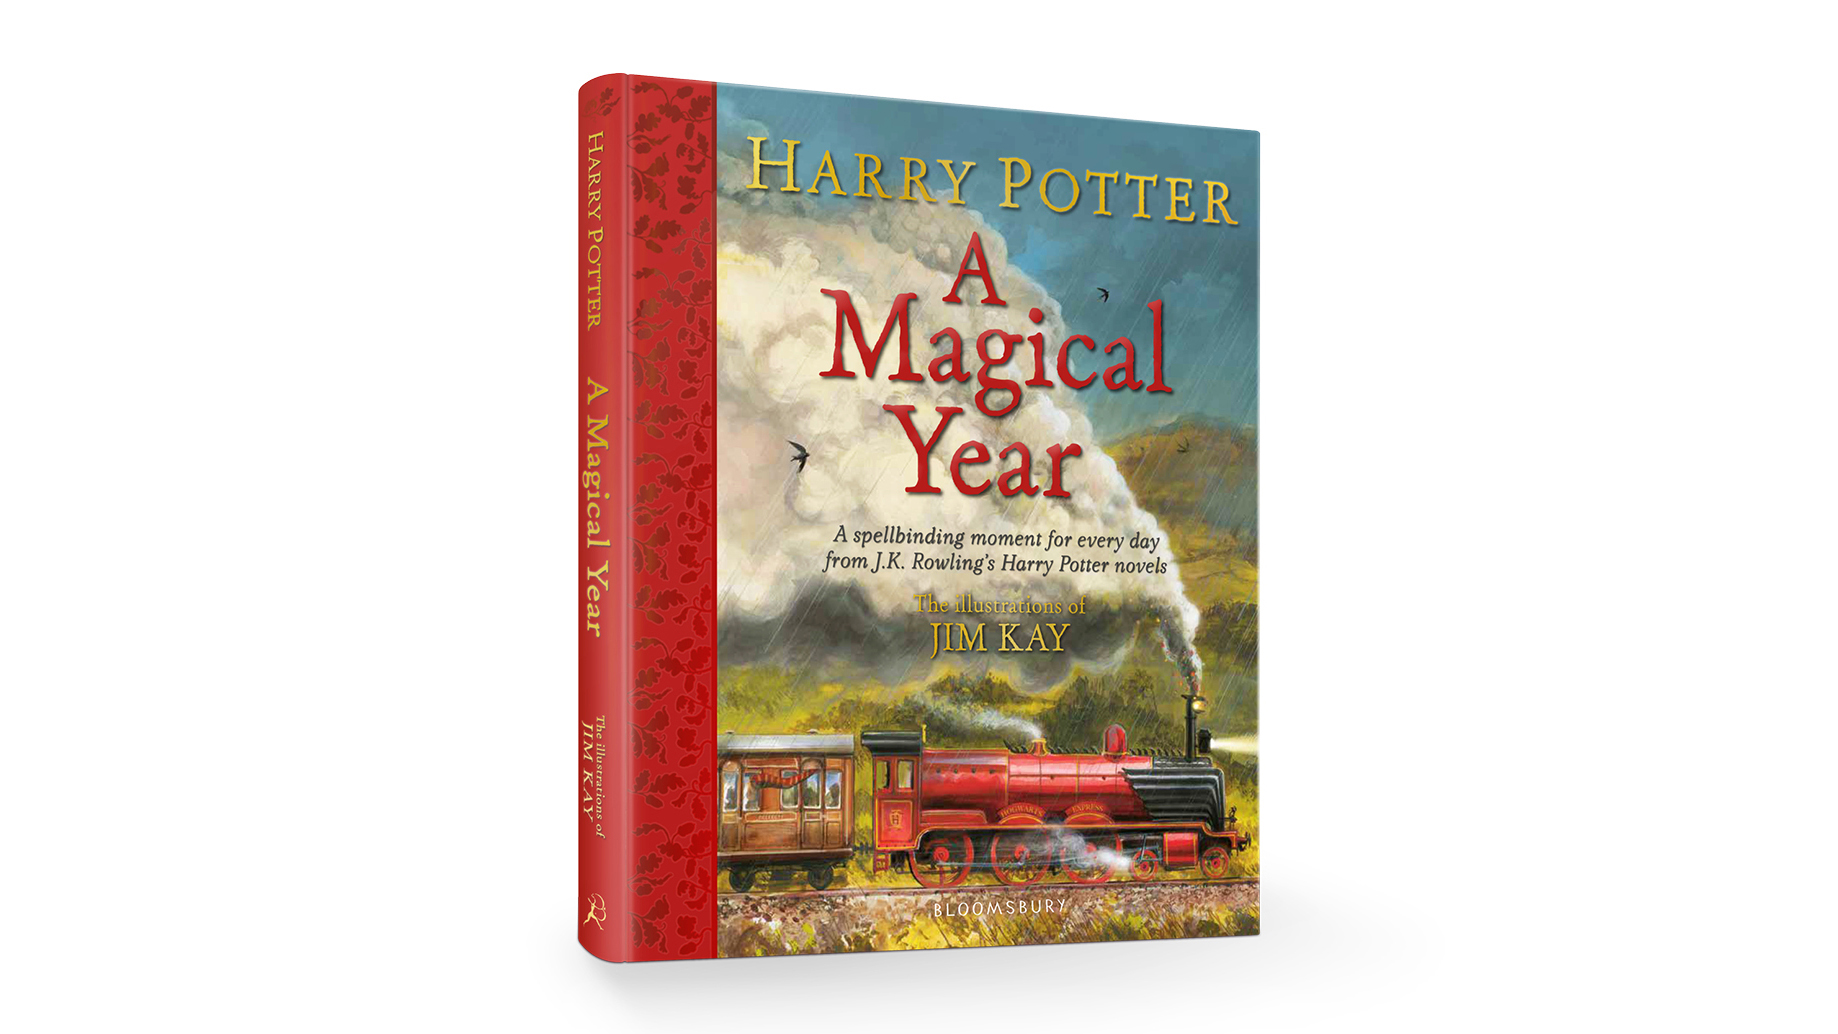 A Magical Year published today